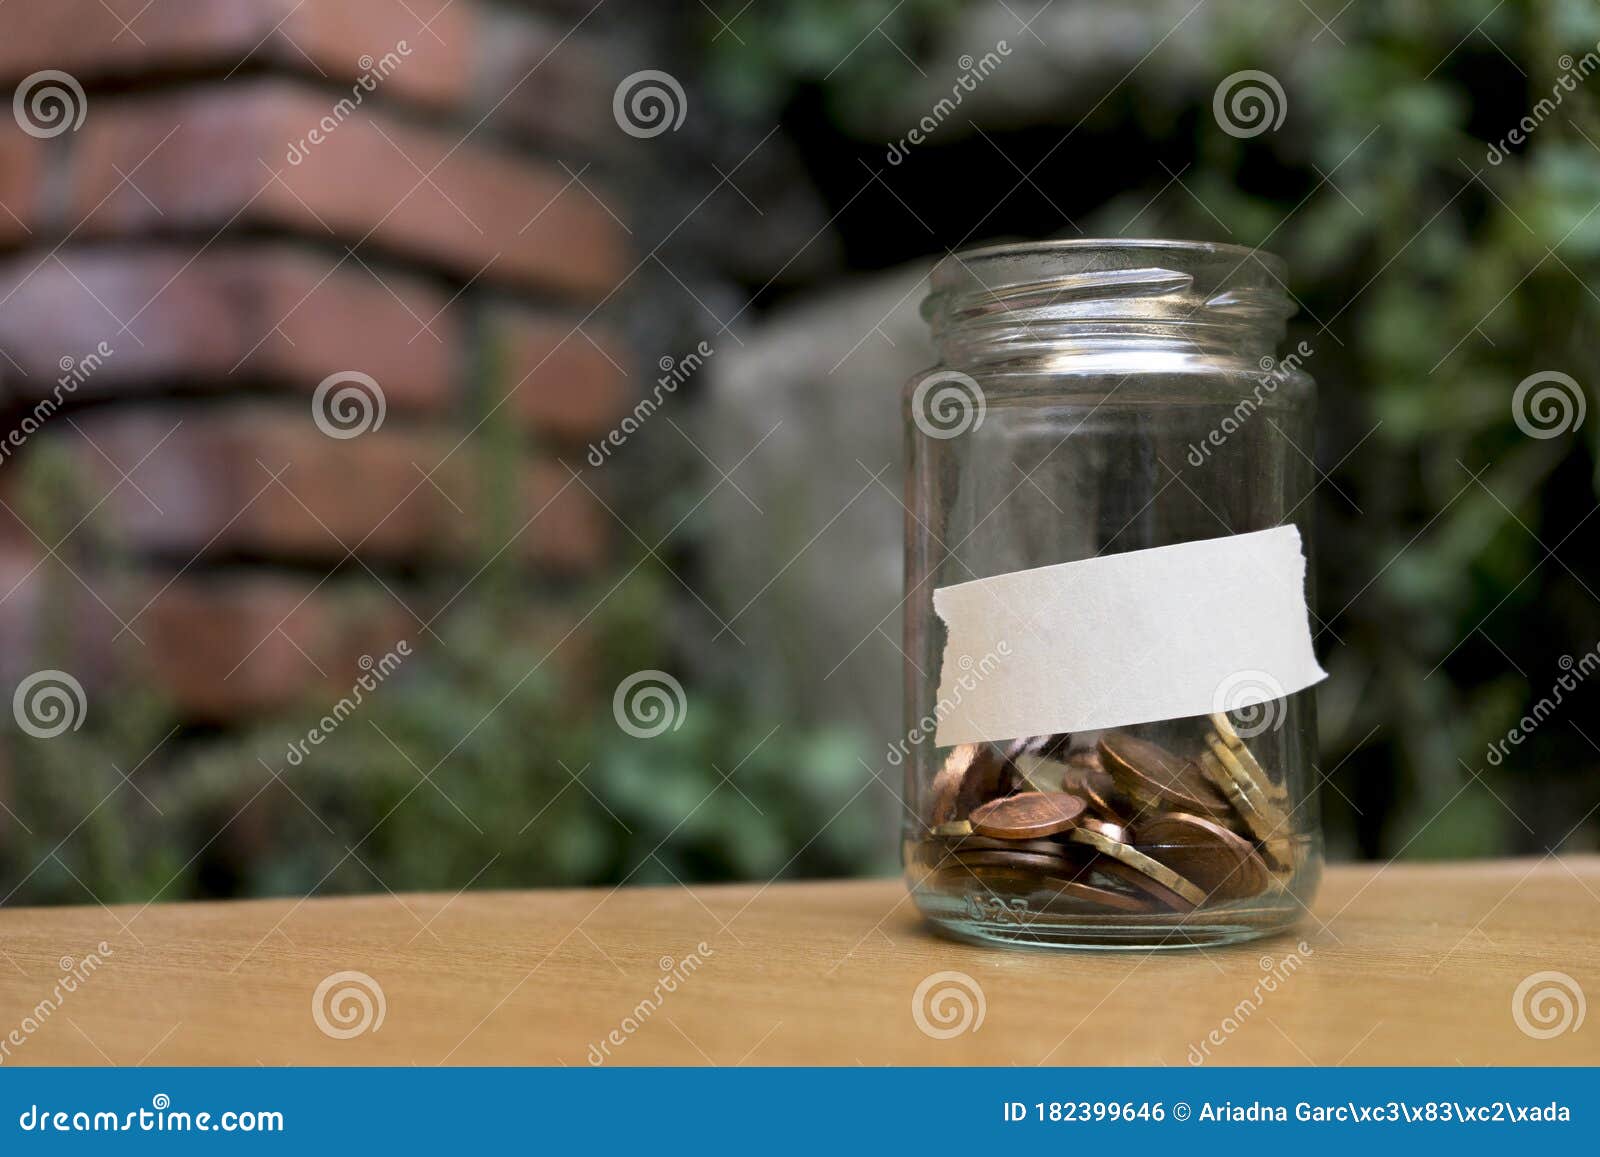 glass jar with coins inside and with a label with a wooden background, plants and bricks.